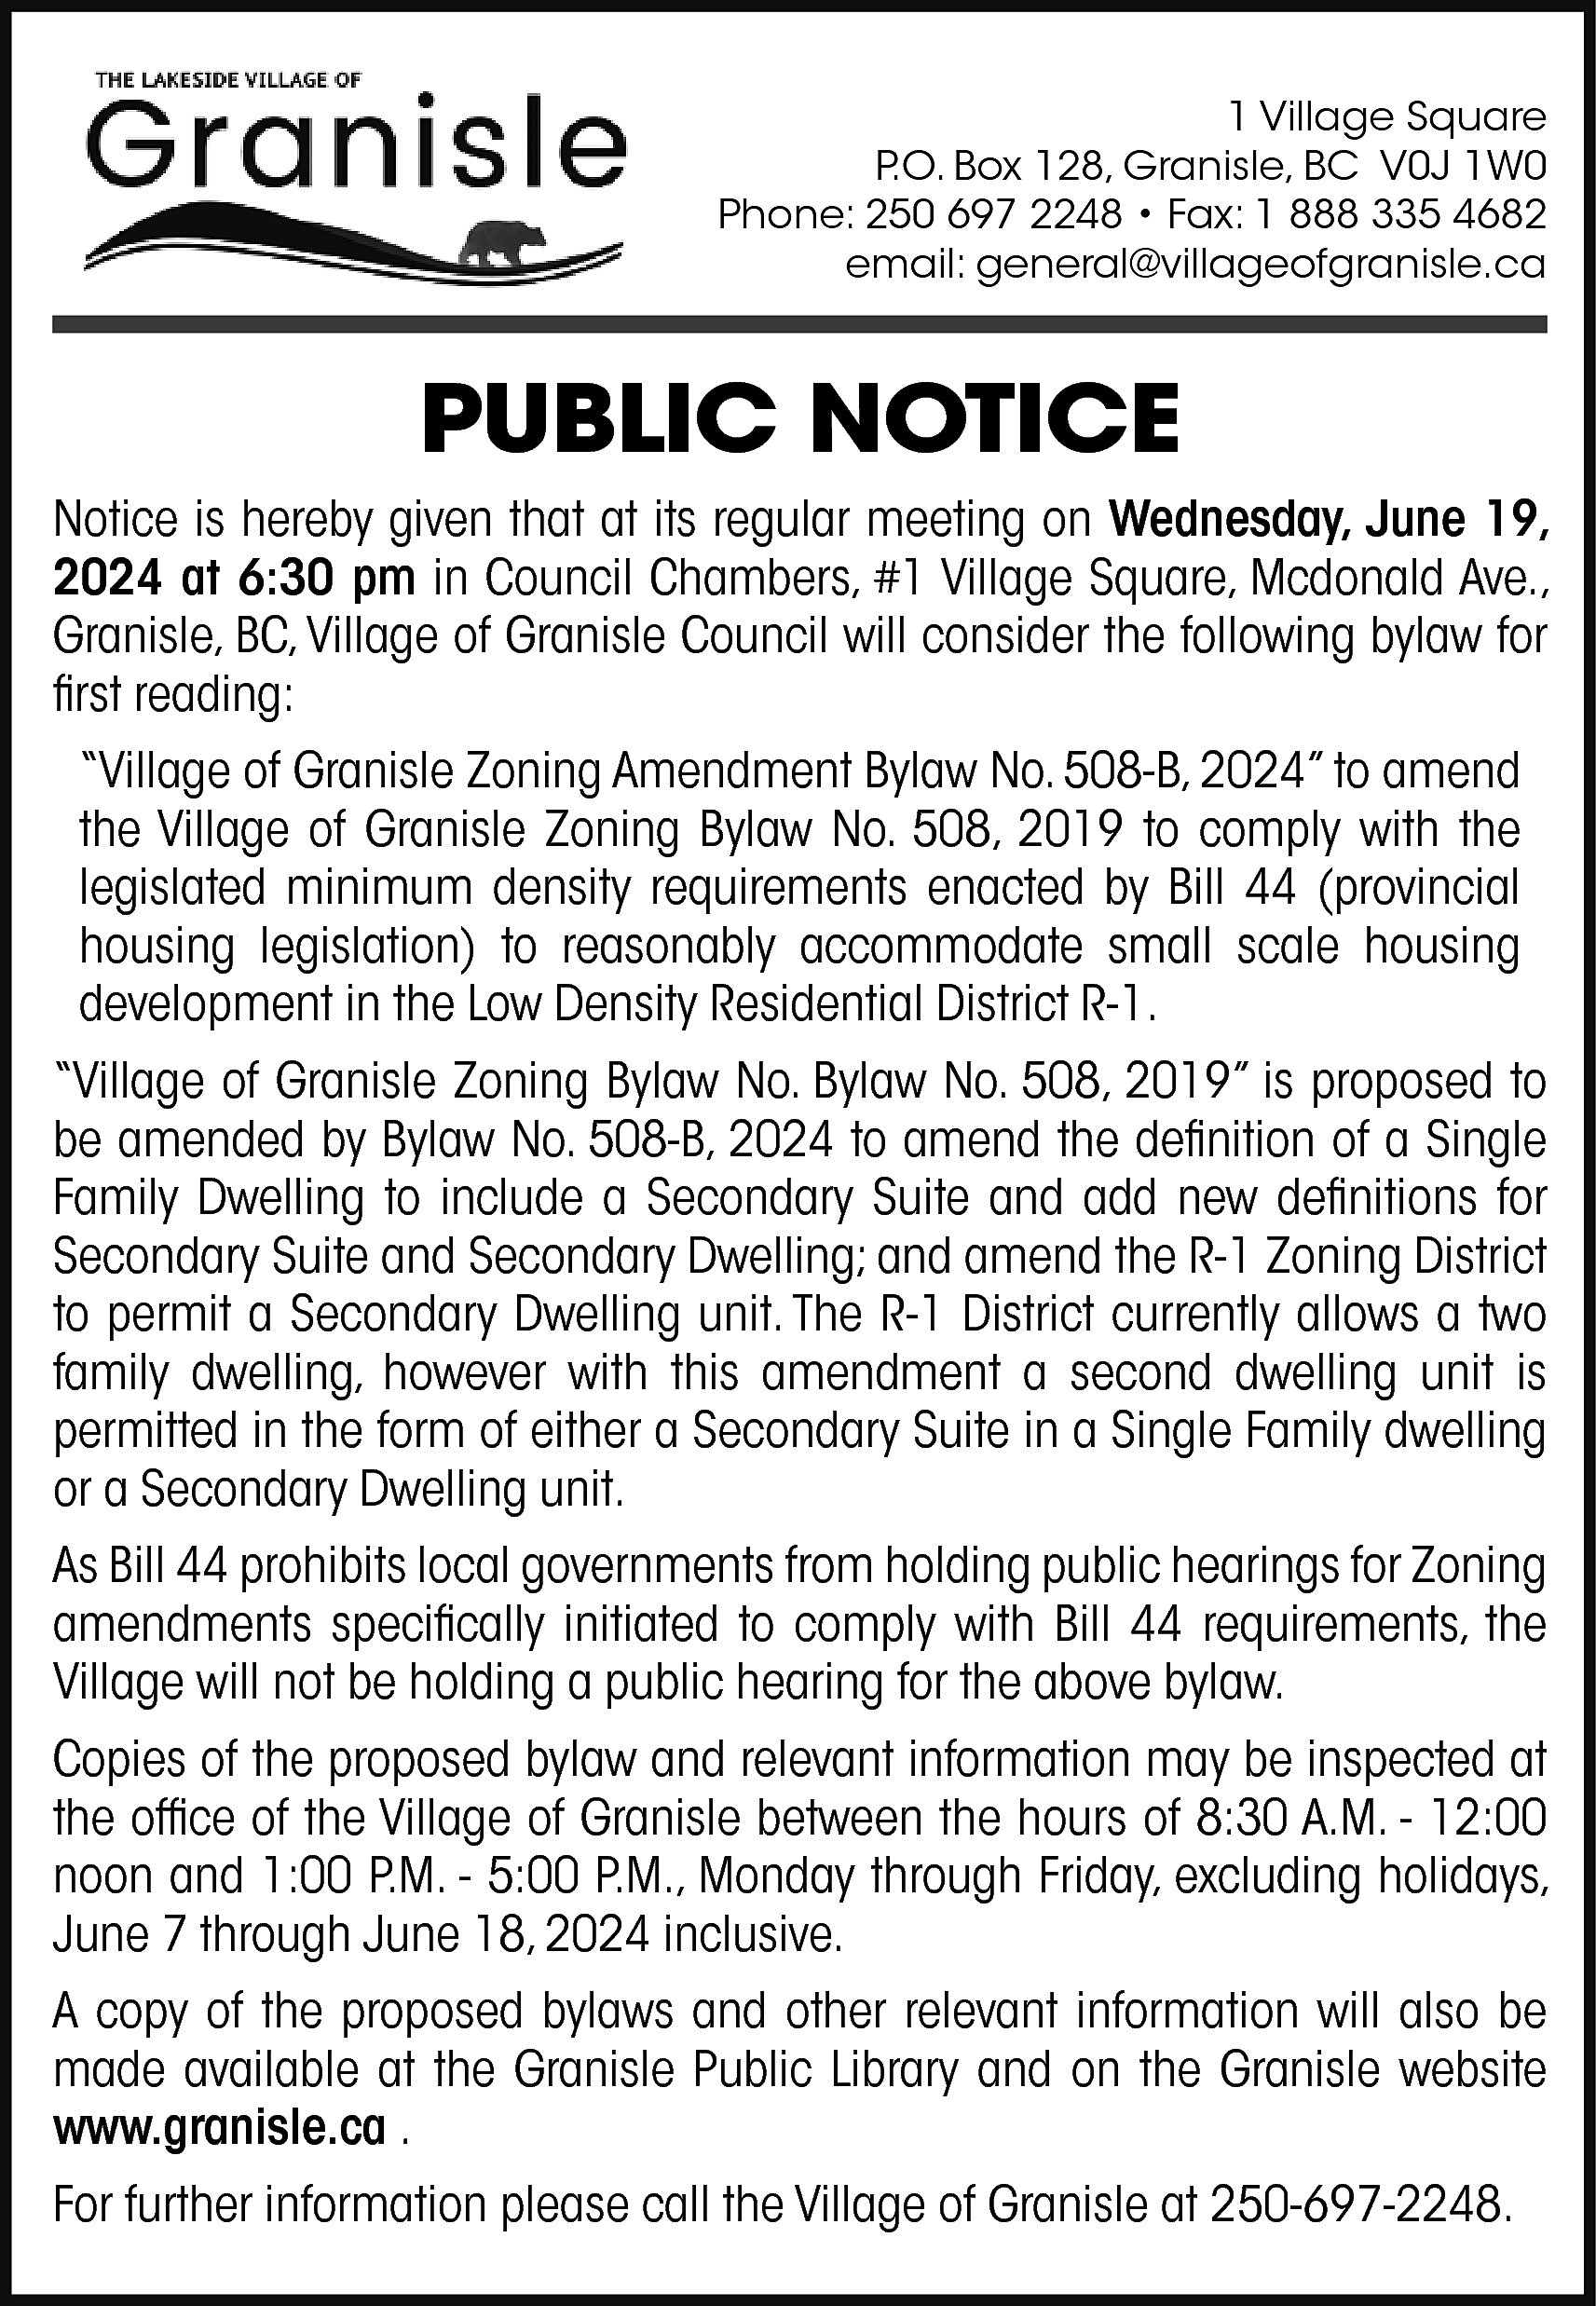 1 Village Square <br>P.O. Box  1 Village Square  P.O. Box 128, Granisle, BC V0J 1W0  Phone: 250 697 2248 • Fax: 1 888 335 4682  email: general@villageofgranisle.ca    PUBLIC NOTICE  Notice is hereby given that at its regular meeting on Wednesday, June 19,  2024 at 6:30 pm in Council Chambers, #1 Village Square, Mcdonald Ave.,  Granisle, BC, Village of Granisle Council will consider the following bylaw for  first reading:  “Village of Granisle Zoning Amendment Bylaw No. 508-B, 2024” to amend  the Village of Granisle Zoning Bylaw No. 508, 2019 to comply with the  legislated minimum density requirements enacted by Bill 44 (provincial  housing legislation) to reasonably accommodate small scale housing  development in the Low Density Residential District R-1.  “Village of Granisle Zoning Bylaw No. Bylaw No. 508, 2019” is proposed to  be amended by Bylaw No. 508-B, 2024 to amend the definition of a Single  Family Dwelling to include a Secondary Suite and add new definitions for  Secondary Suite and Secondary Dwelling; and amend the R-1 Zoning District  to permit a Secondary Dwelling unit. The R-1 District currently allows a two  family dwelling, however with this amendment a second dwelling unit is  permitted in the form of either a Secondary Suite in a Single Family dwelling  or a Secondary Dwelling unit.  As Bill 44 prohibits local governments from holding public hearings for Zoning  amendments specifically initiated to comply with Bill 44 requirements, the  Village will not be holding a public hearing for the above bylaw.  Copies of the proposed bylaw and relevant information may be inspected at  the office of the Village of Granisle between the hours of 8:30 A.M. - 12:00  noon and 1:00 P.M. - 5:00 P.M., Monday through Friday, excluding holidays,  June 7 through June 18, 2024 inclusive.  A copy of the proposed bylaws and other relevant information will also be  made available at the Granisle Public Library and on the Granisle website  www.granisle.ca .  For further information please call the Village of Granisle at 250-697-2248.    